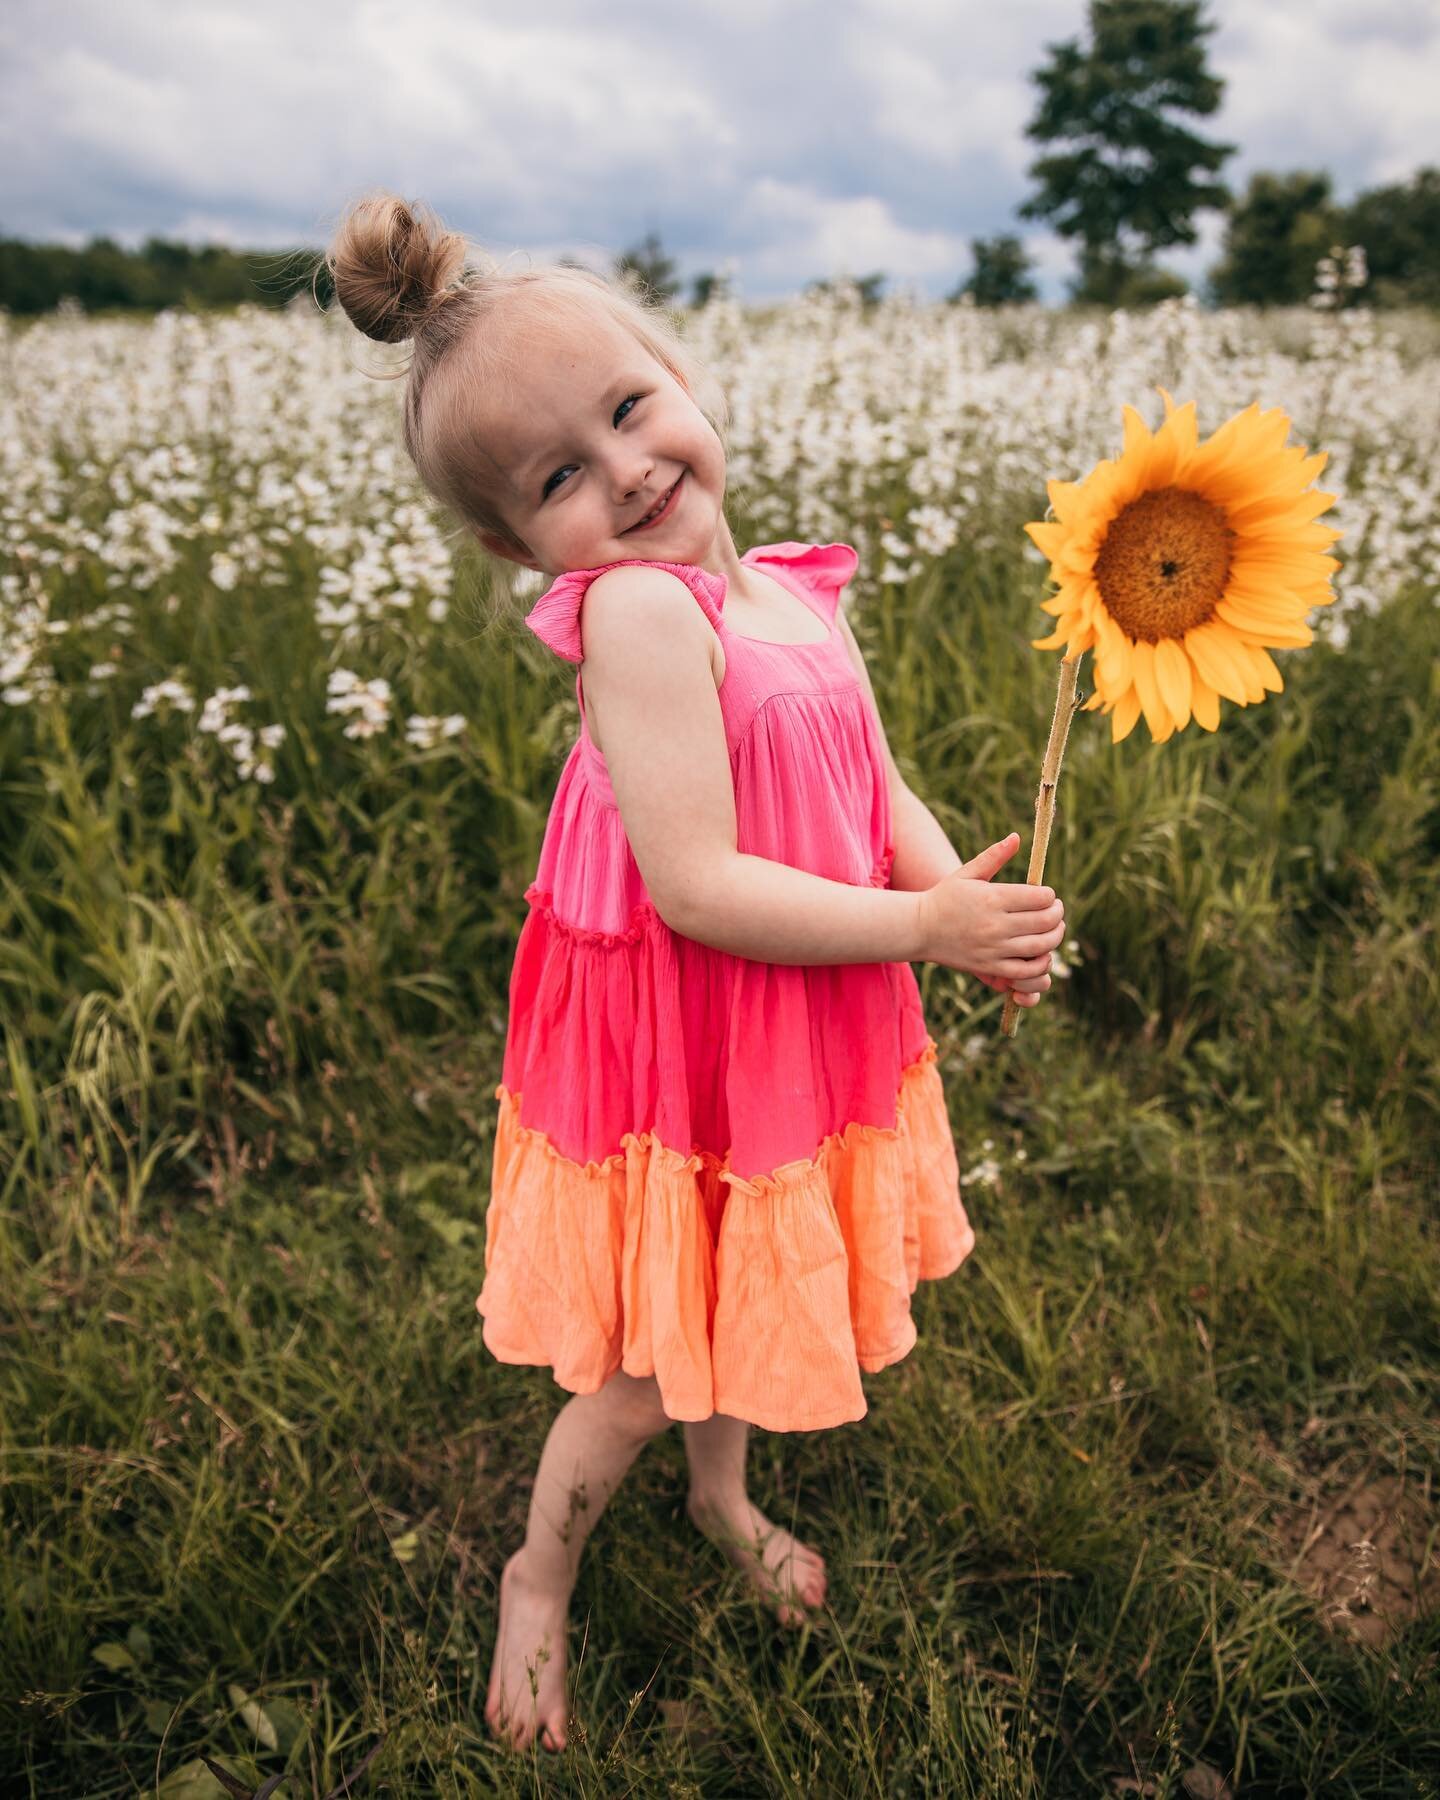 Just our sunshine girl being the bright (sometimes fiery 😂) light that she is. 🌻 Do you do daily affirmations with your littles? We started doing them when Emmy turned 2 &amp; they&rsquo;ve been a daily reminder ever since of who she is. 💛 We add 